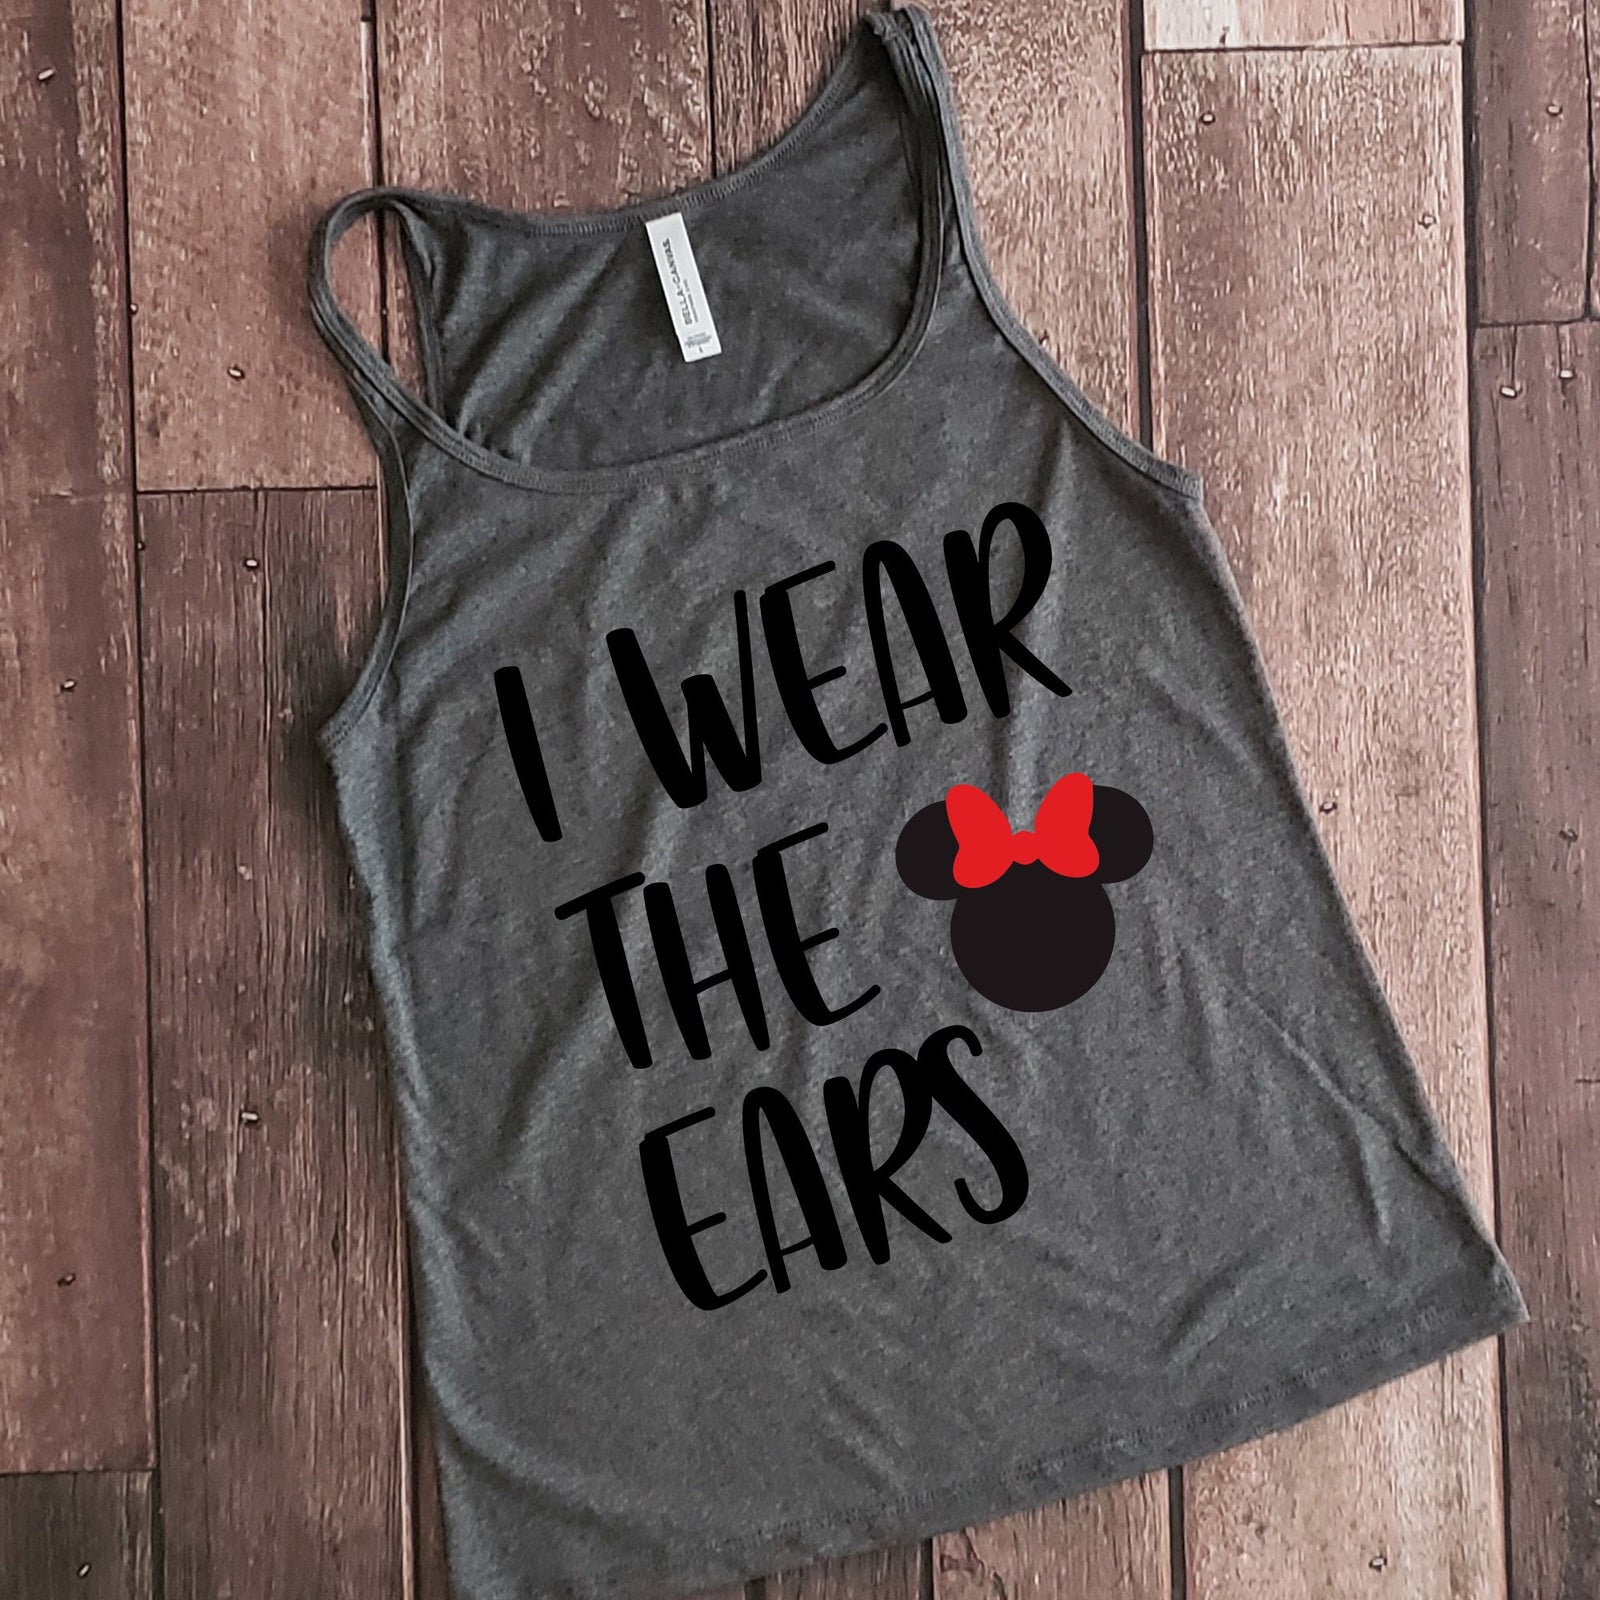 I Wear the Ears Minnie Mouse Ladies Relaxed Fit Jersey Tank Top